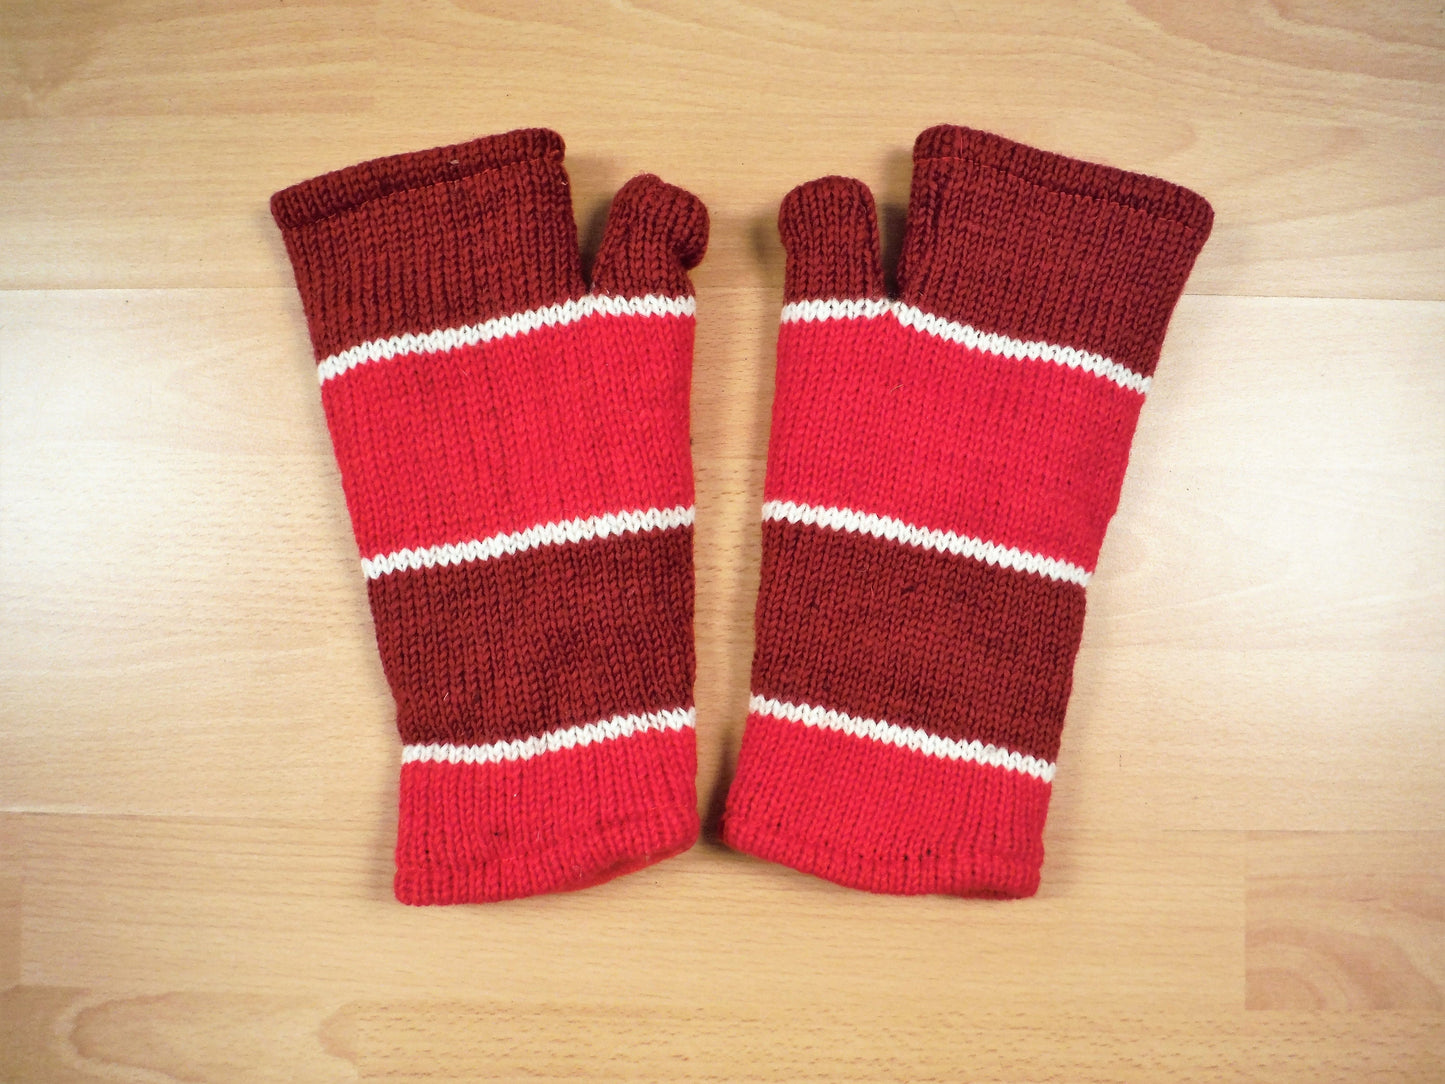 Fleece Lined Knitted Wrist Warmers - Red and White Striped (Loose Fit) - Bare Canvas